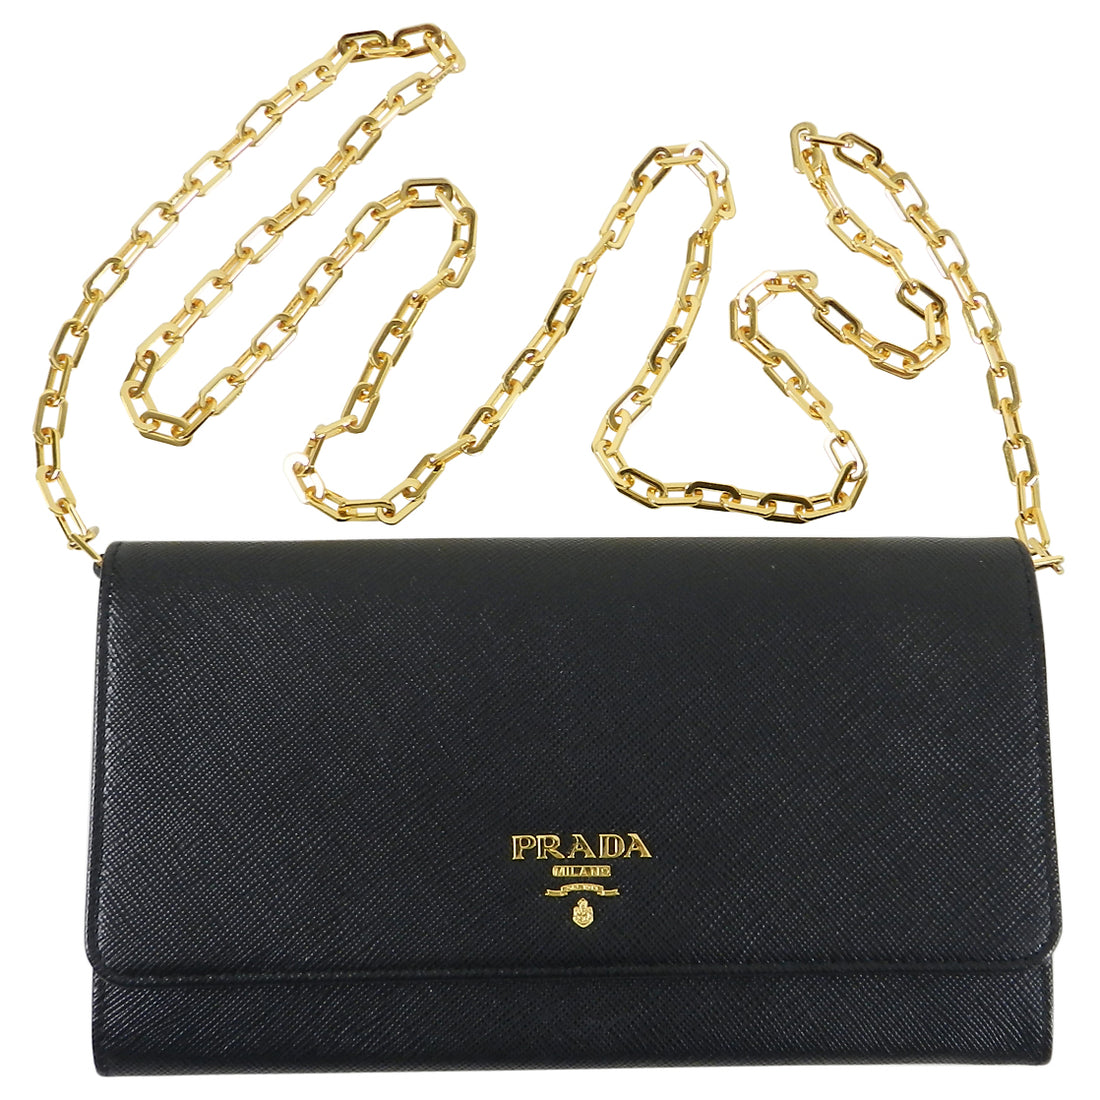 PRADA Saffiano Black leather WOC with gold hardware. R9850 Condition:  Excellent with authenticity cards. (No dustbag)